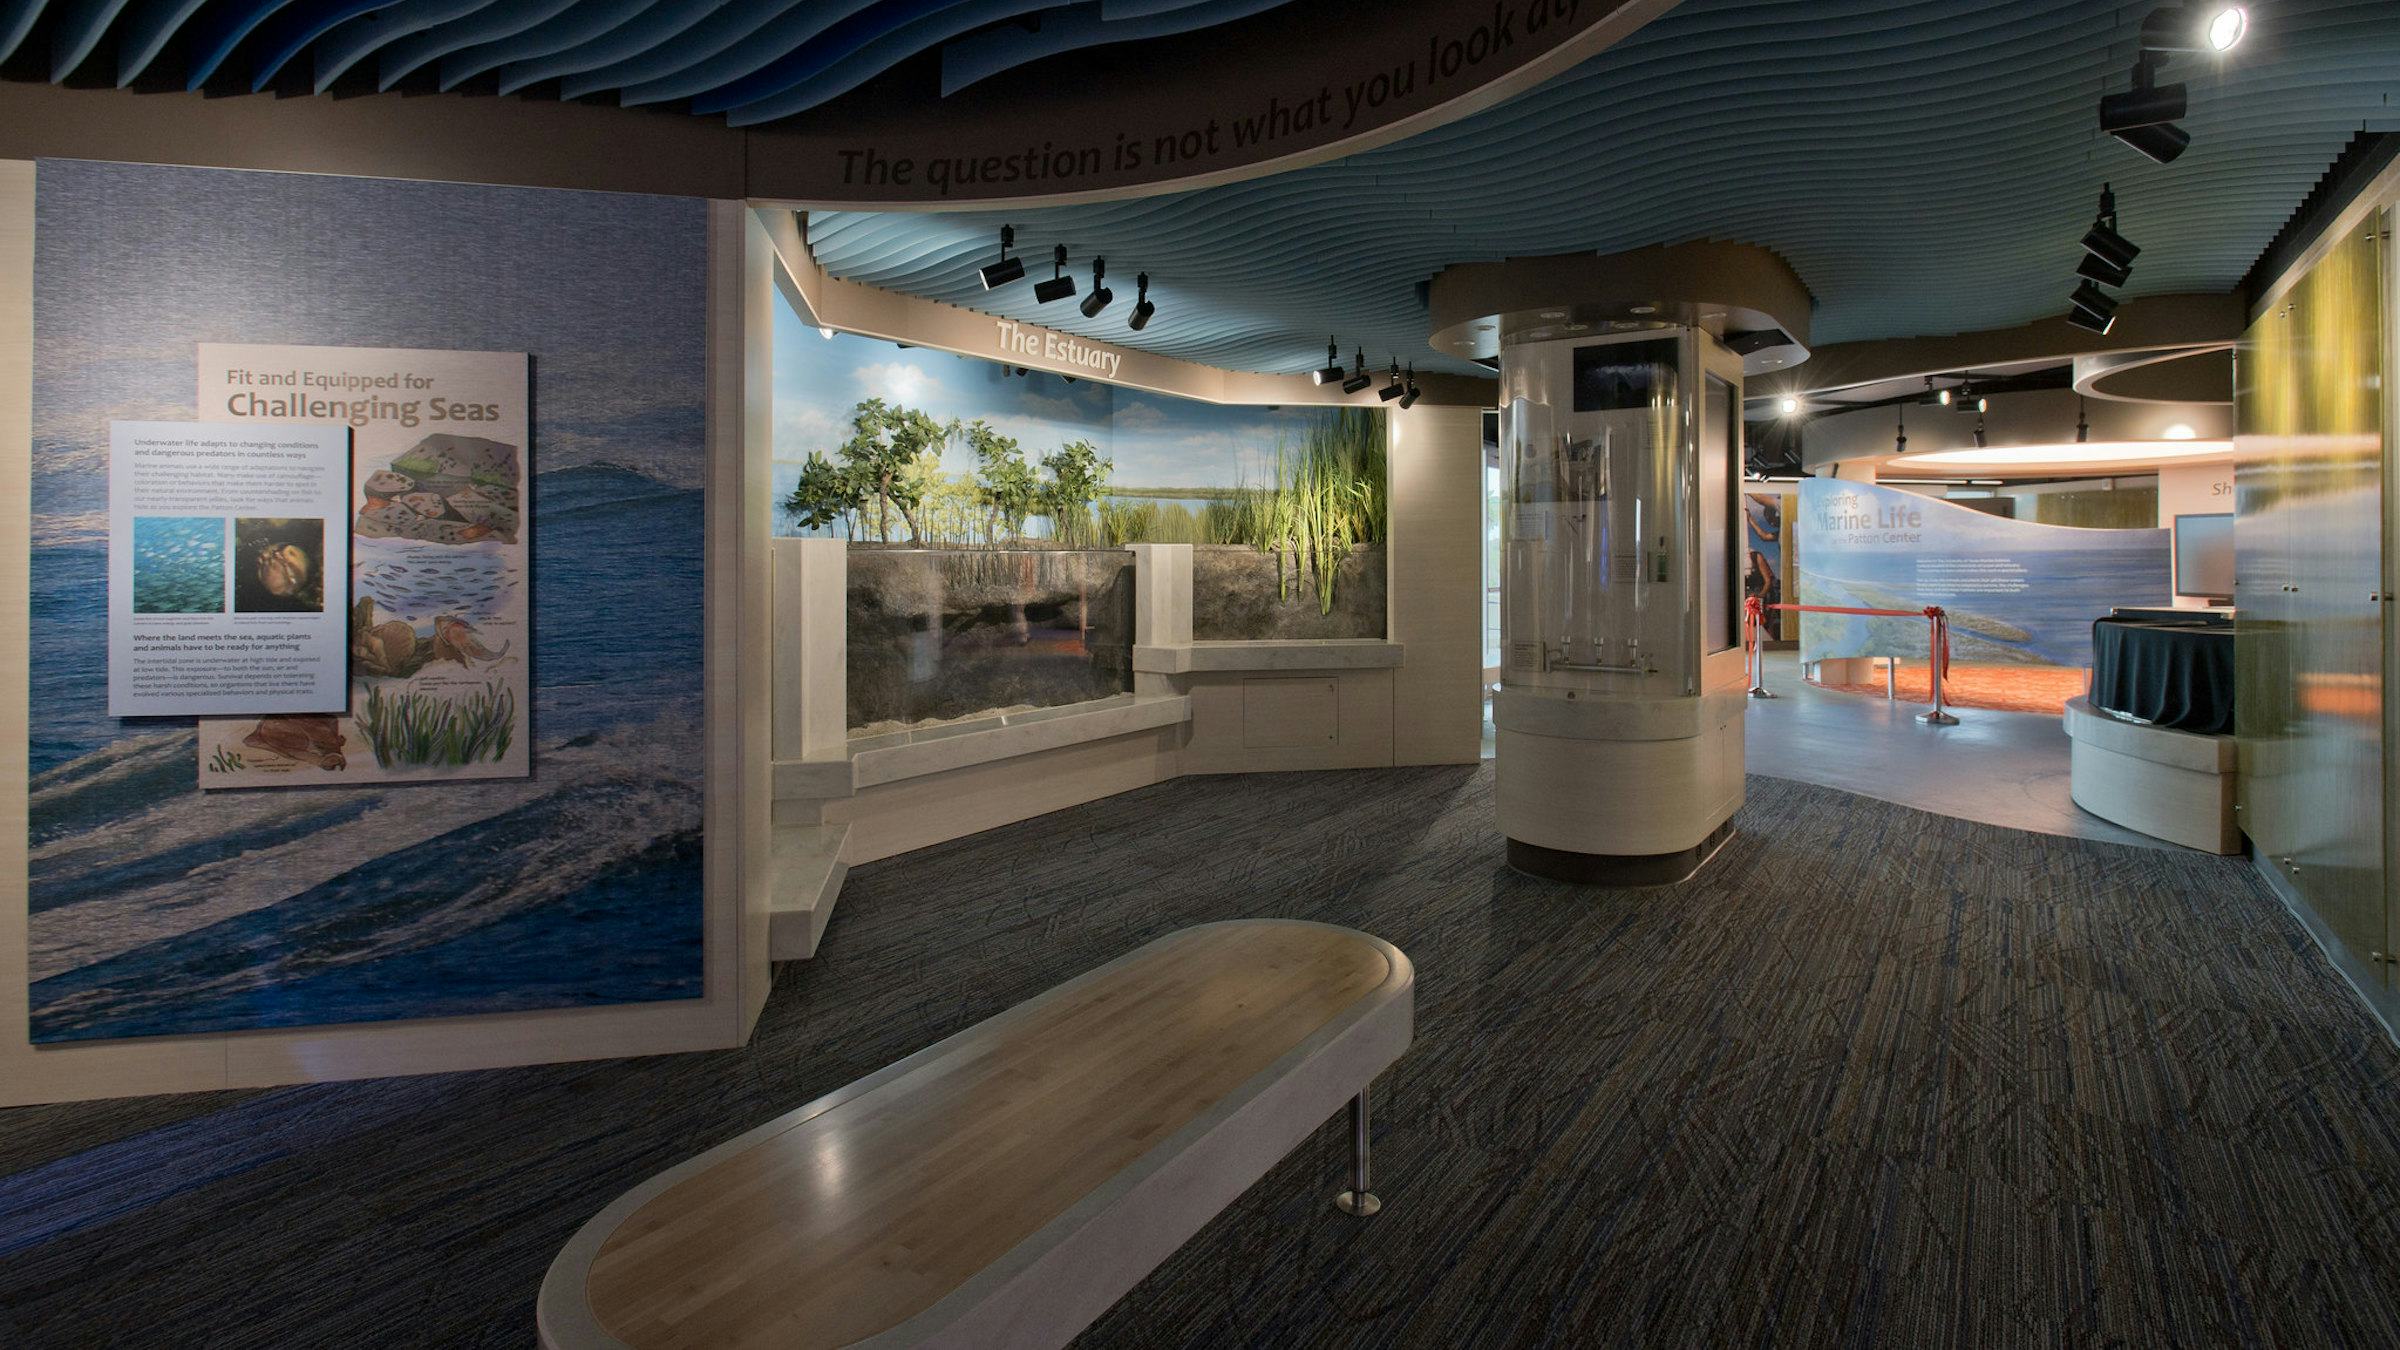 "Fit and Equipped for Challenging Seas" and "The Estuary" say signs on exhibit walls in the new Patton Center